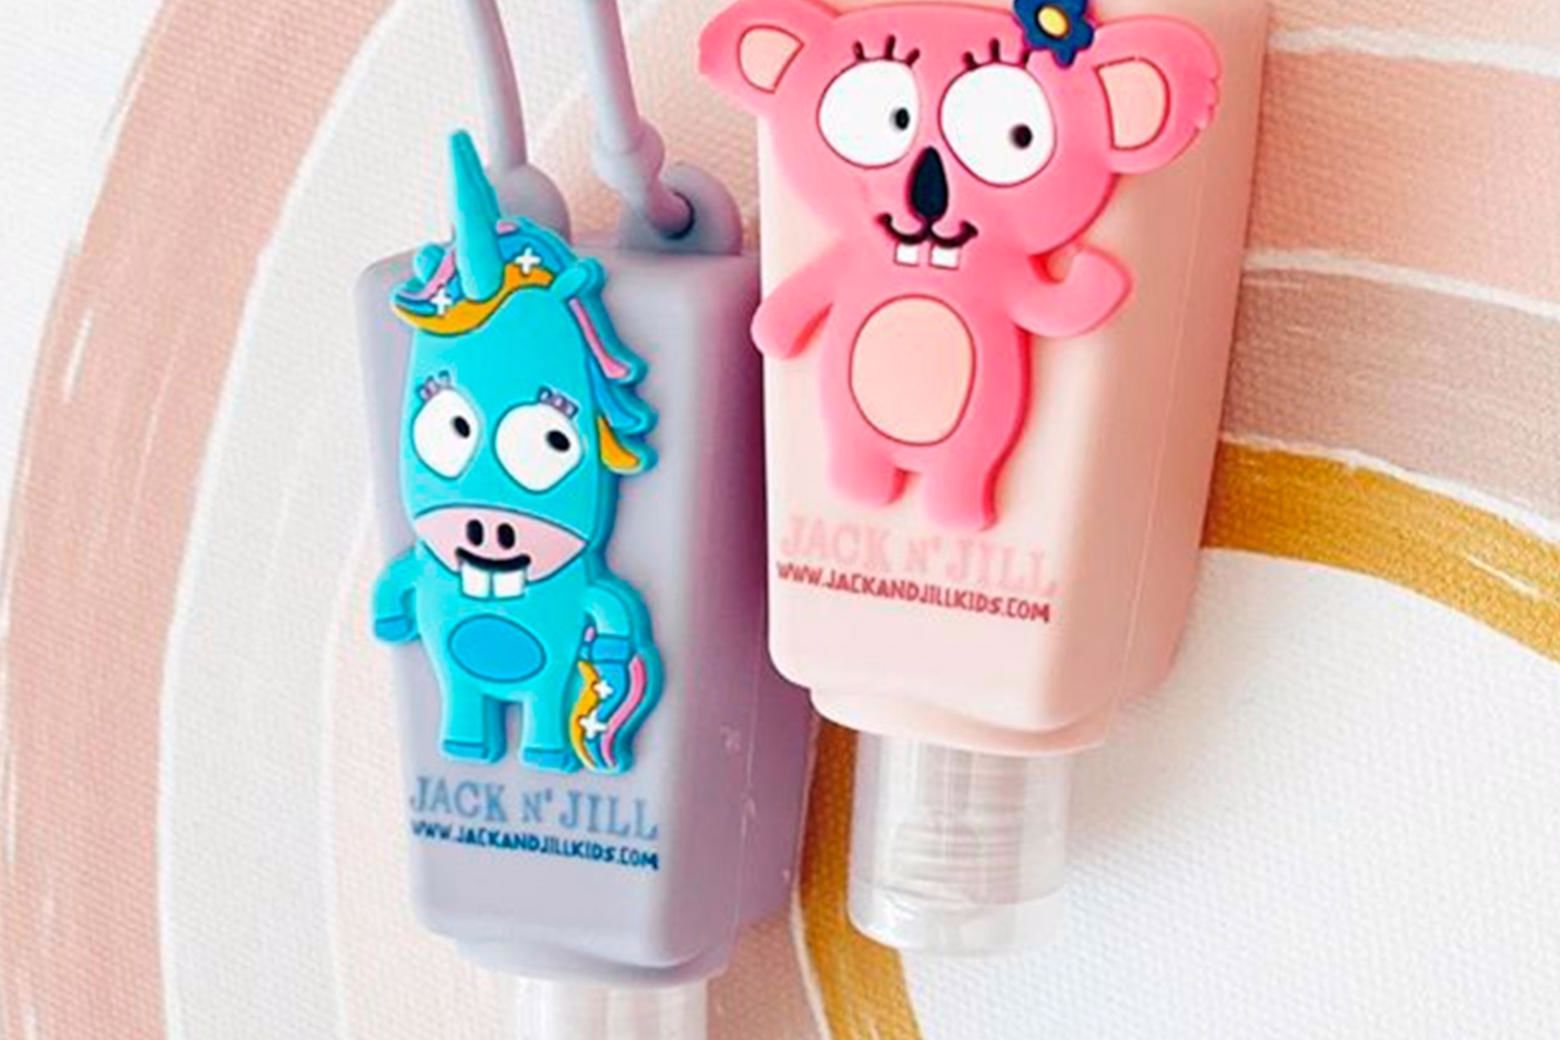 Jack and Jill hand sanitizer